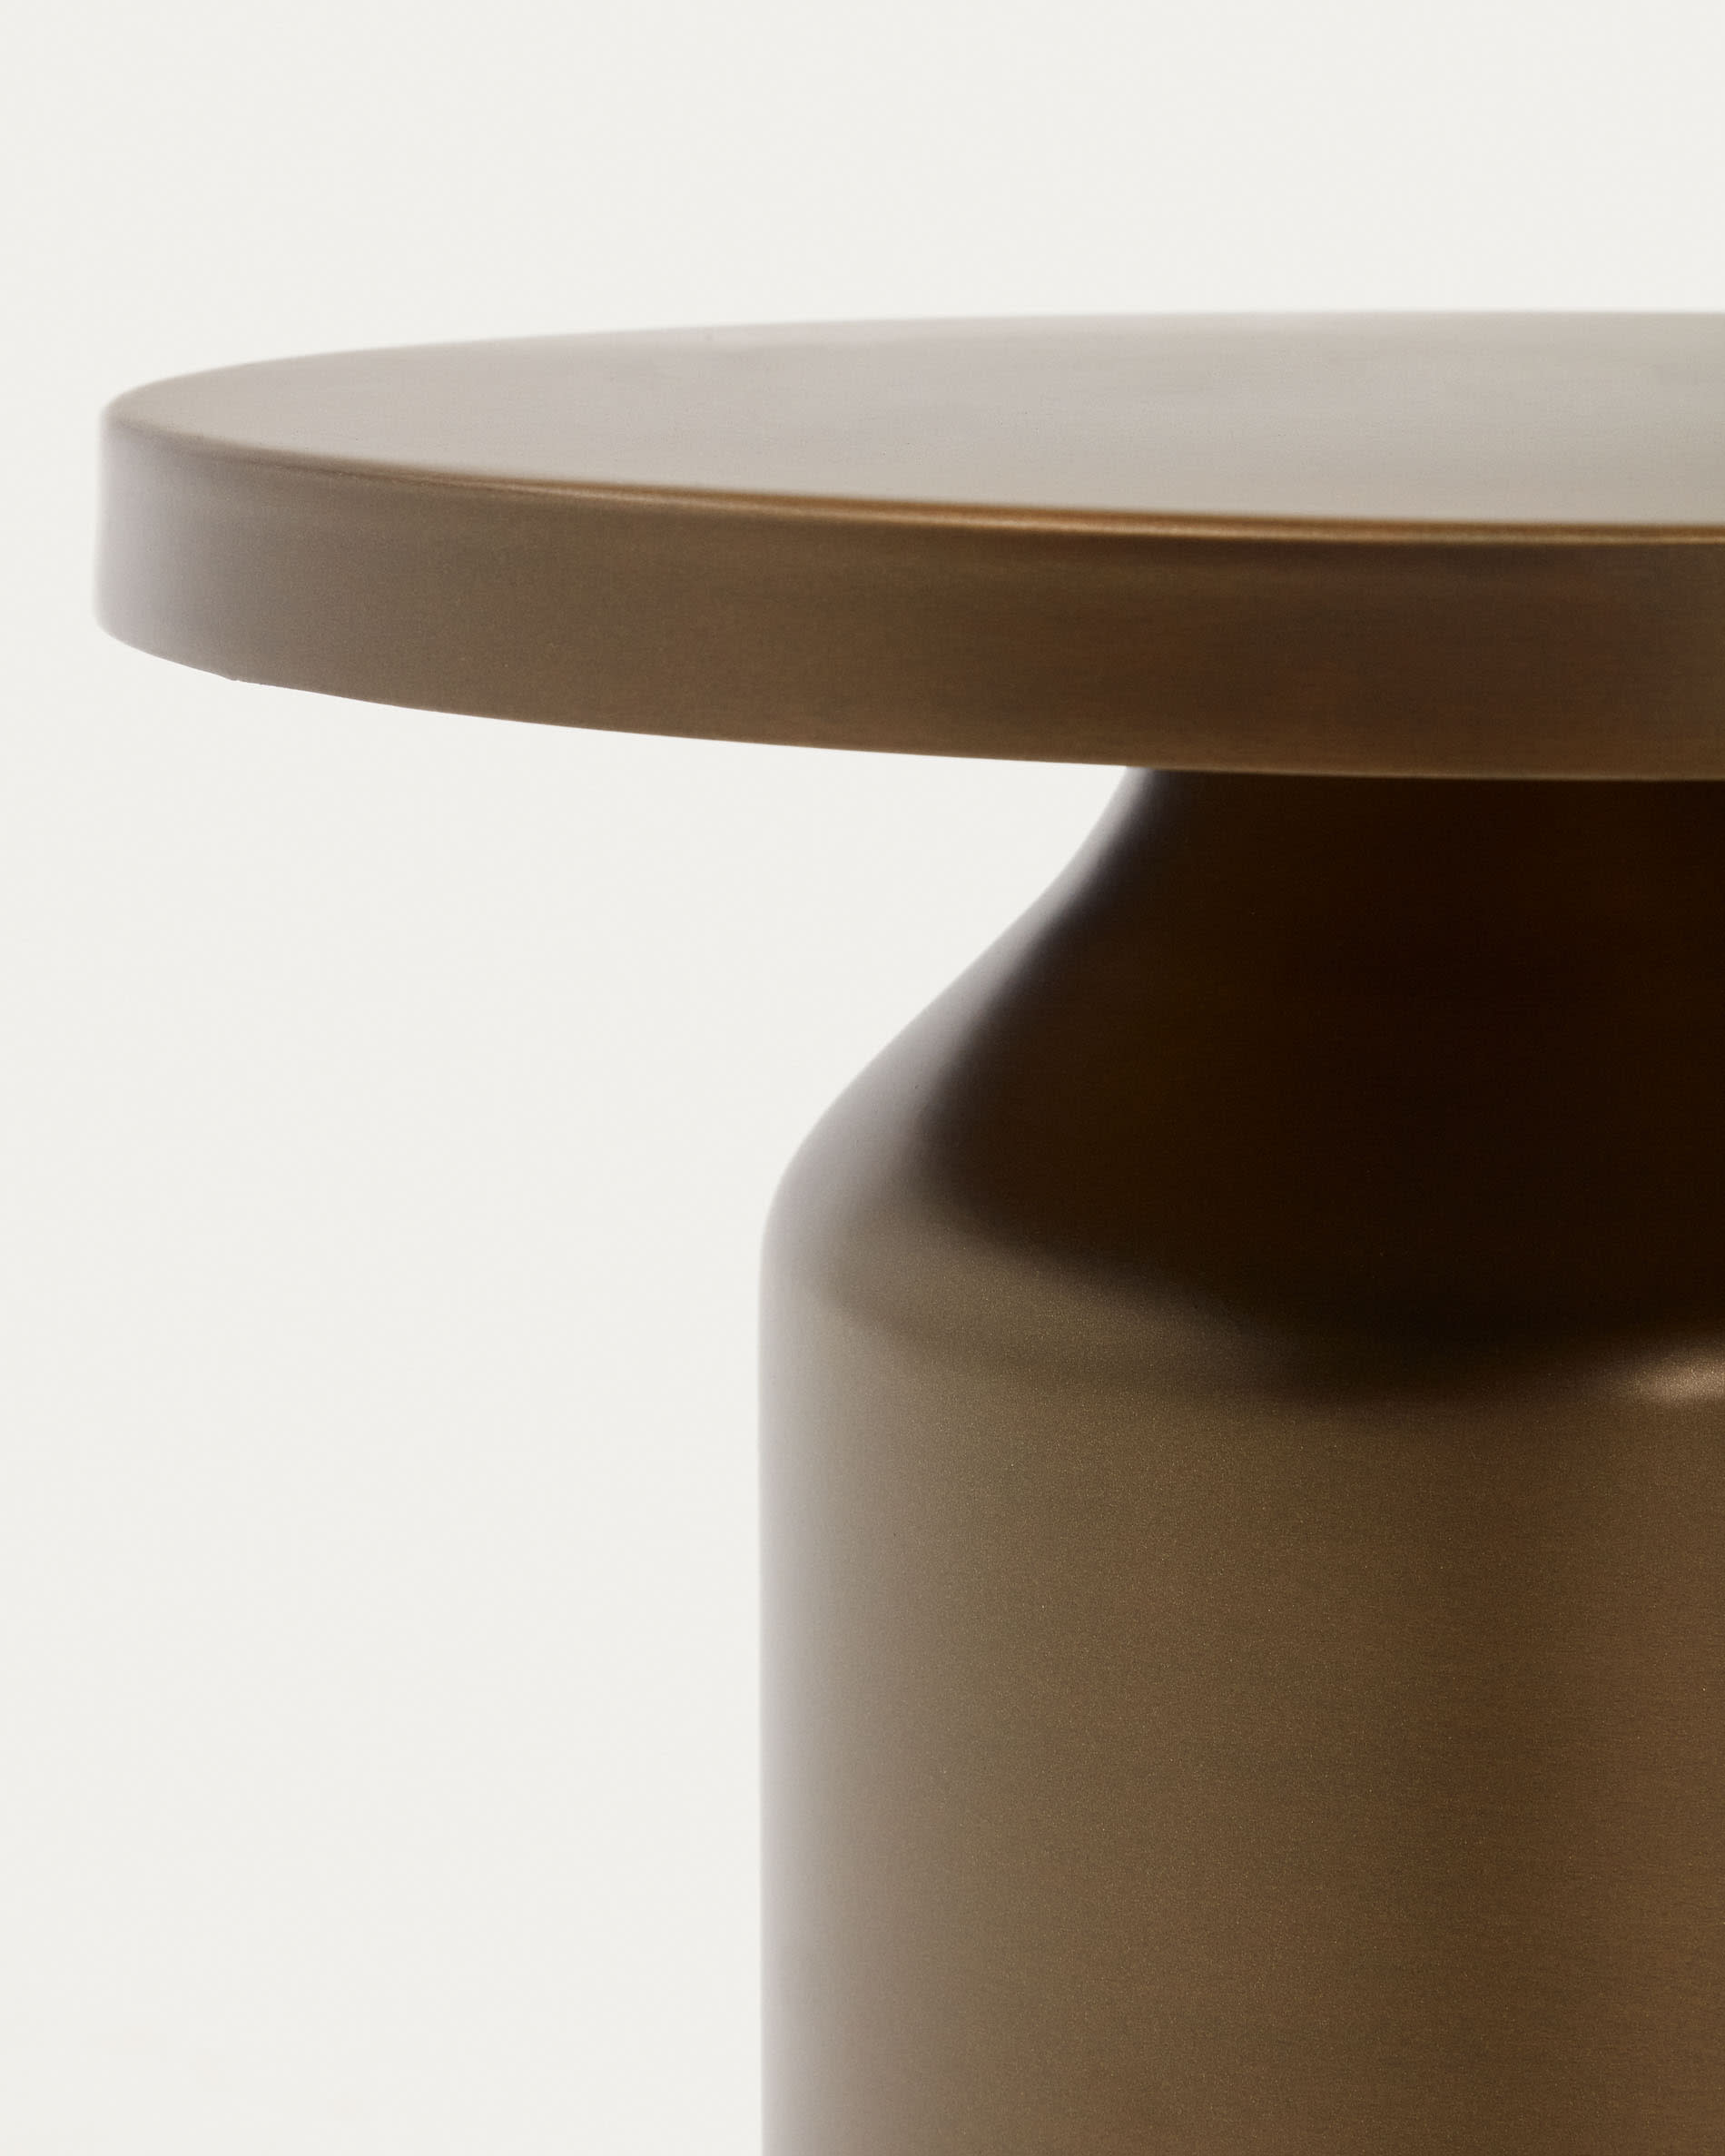 Malya | metal copper brushed table Ø 40.5 side cm Home in round Kave